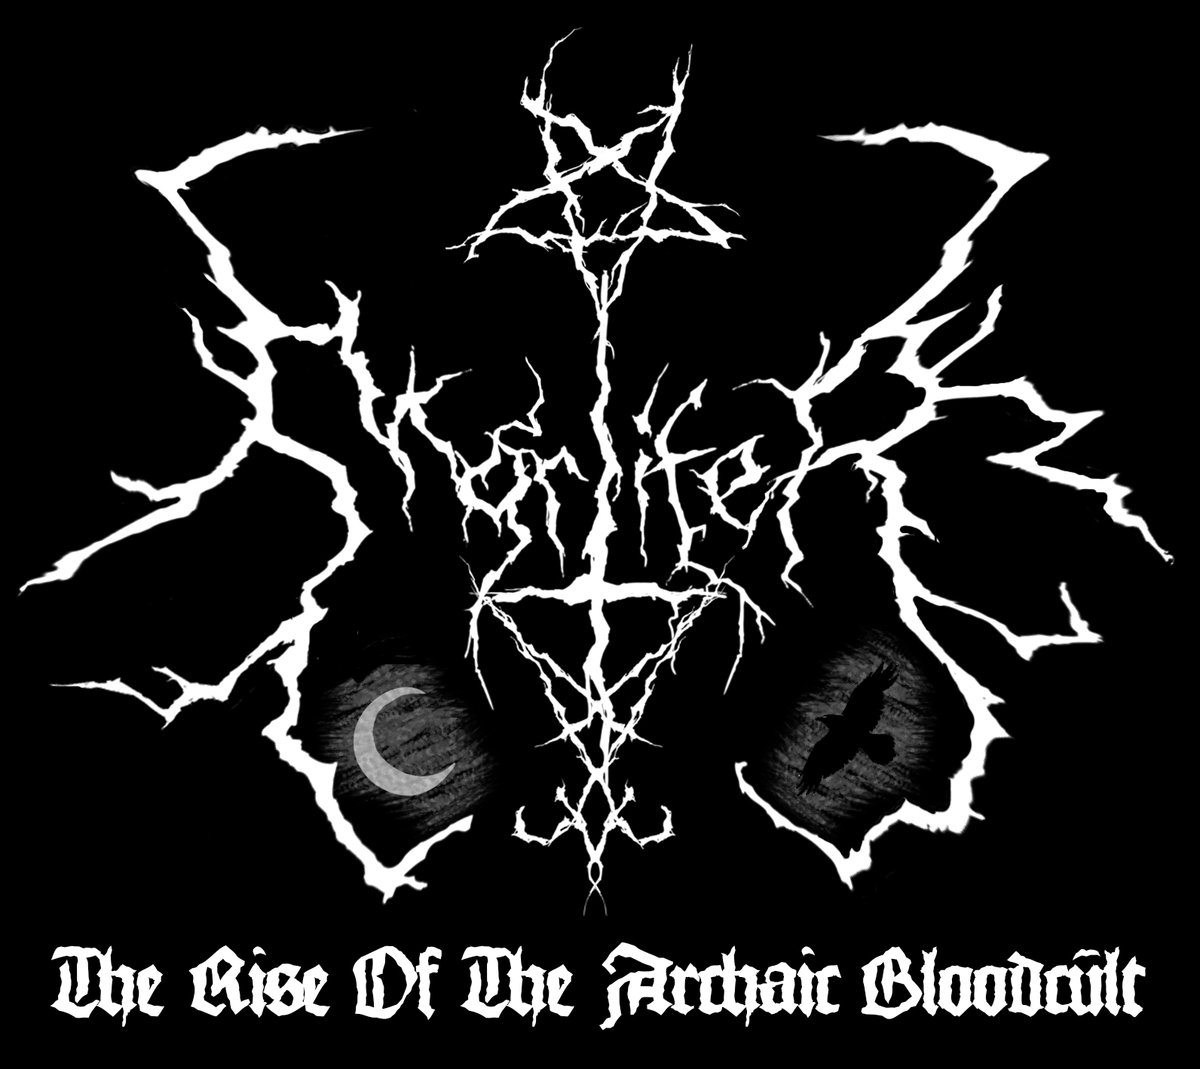 Mortifer - The Rise Of The Archaic Bloodcult (2015)